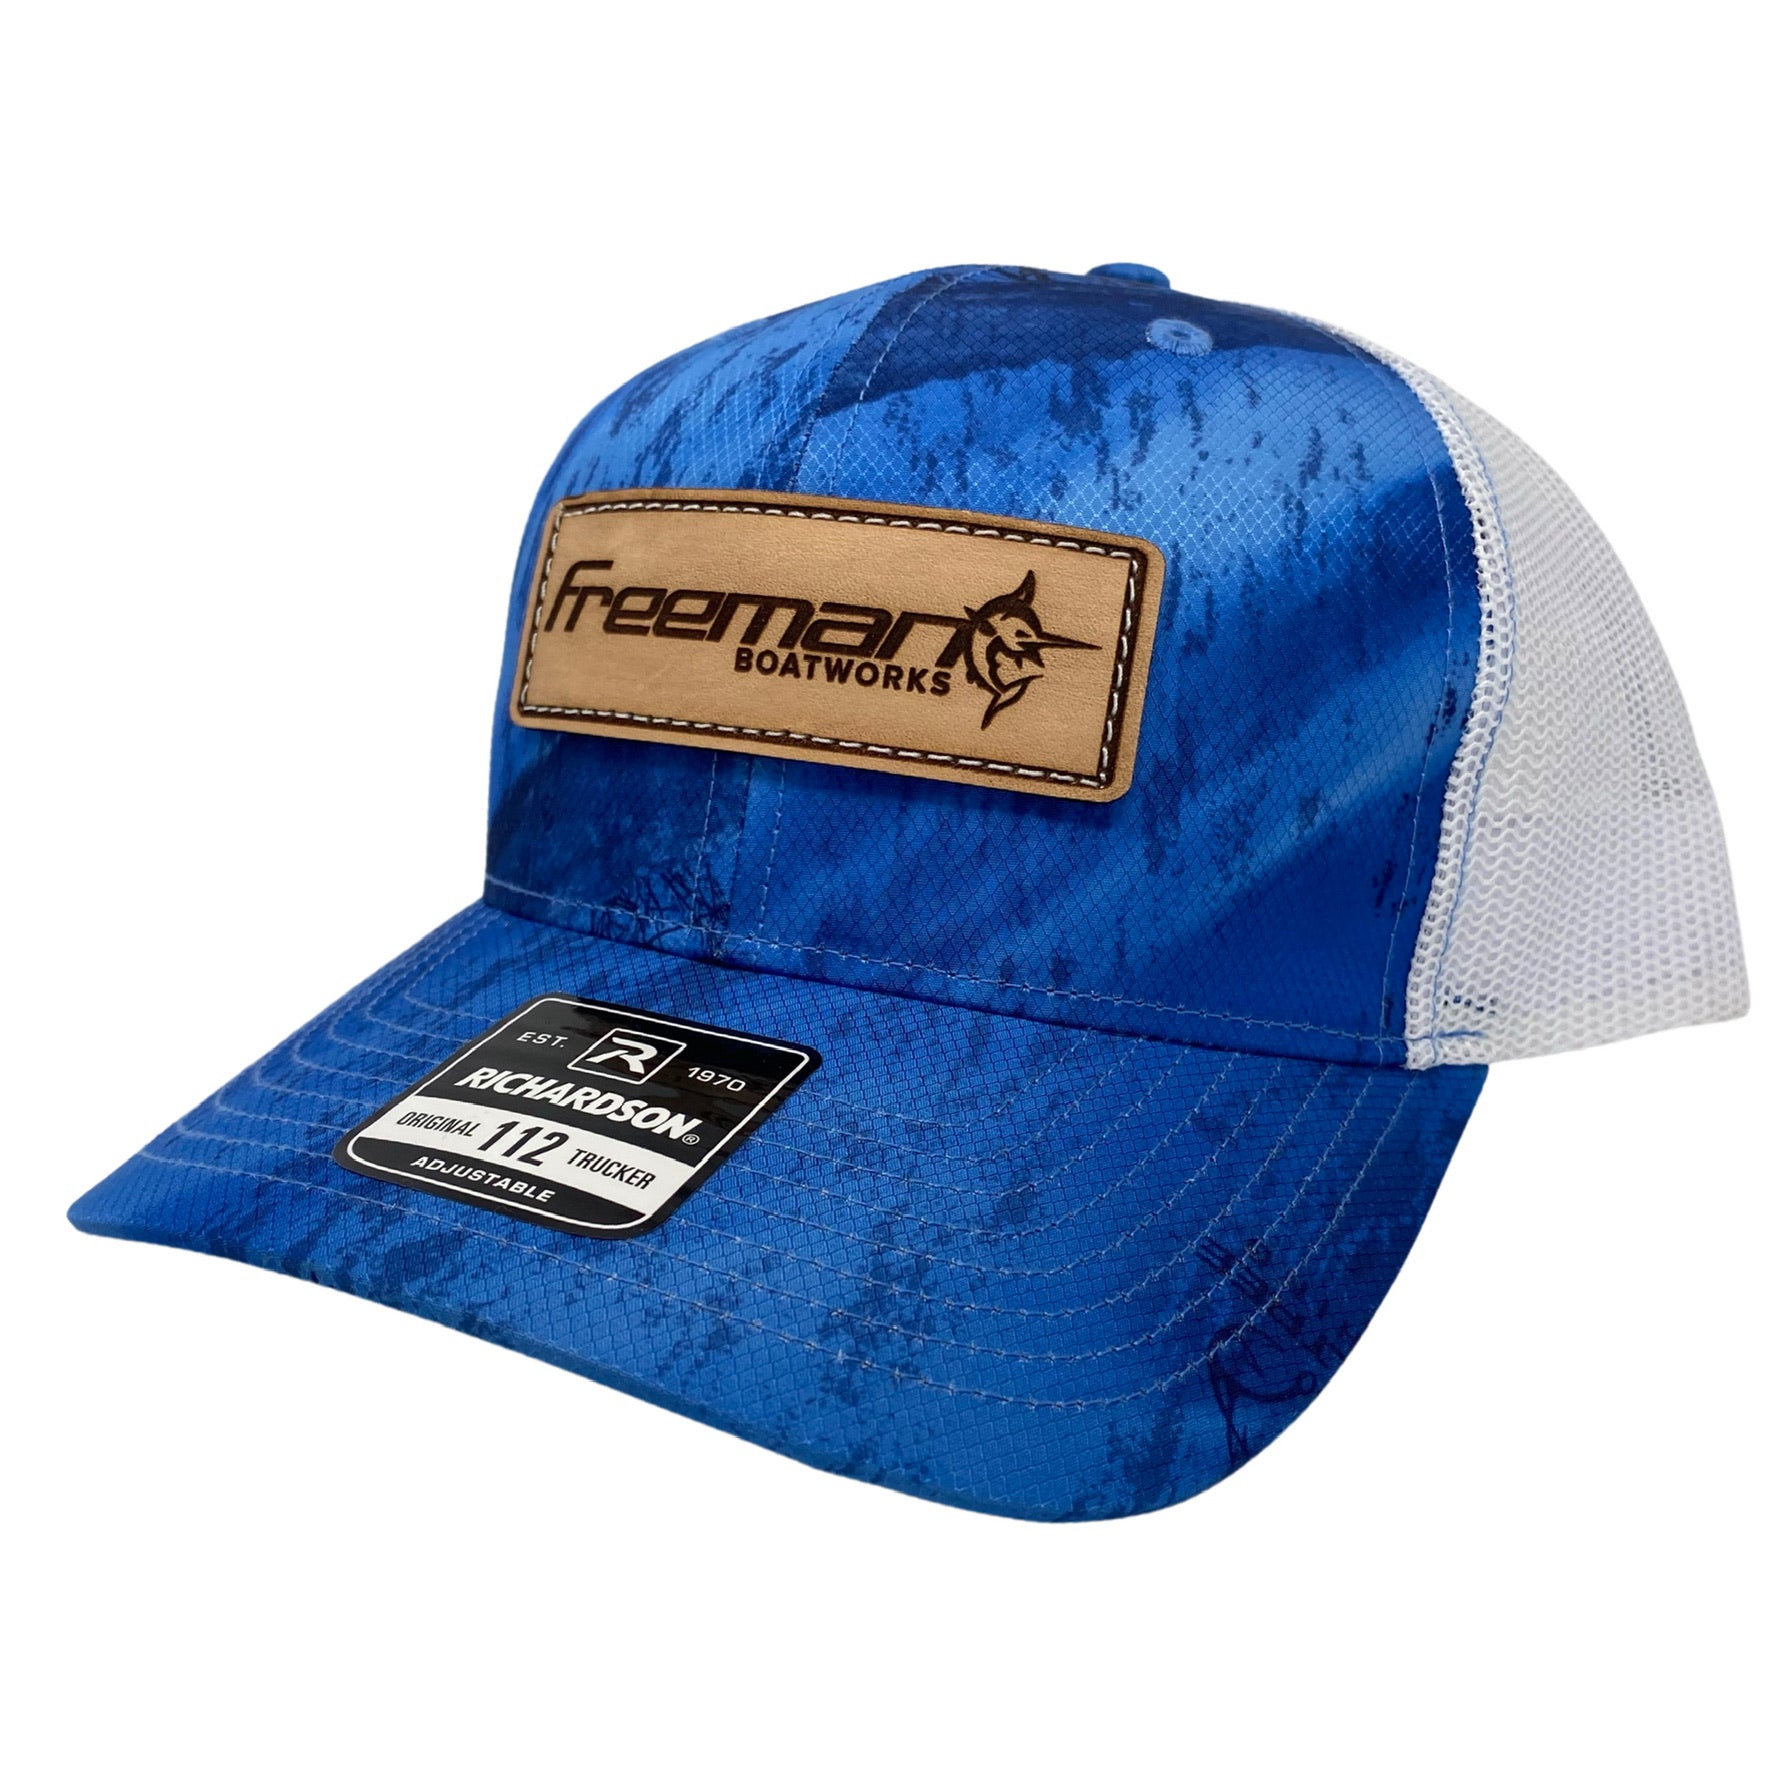 Freeman Boatworks – Tagged hats-visors– Boat Builders Trading Company